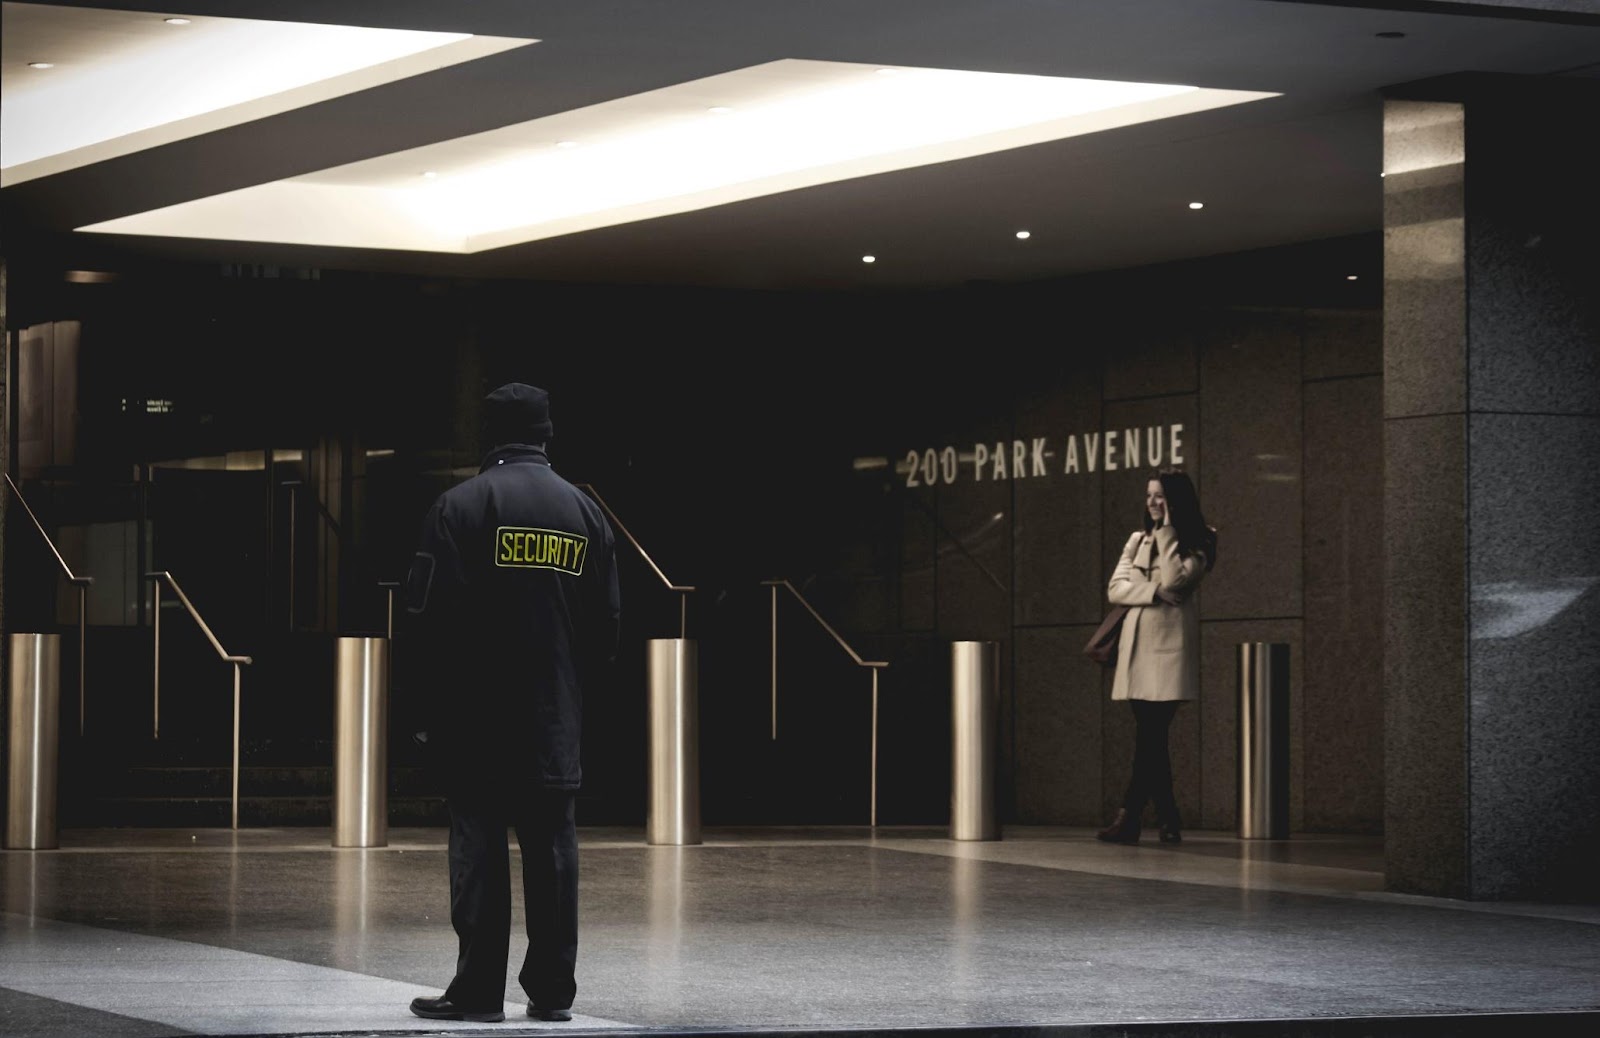 Security Guard standing on the Gray Floor | Photo by Collin Armstrong from unsplash.com